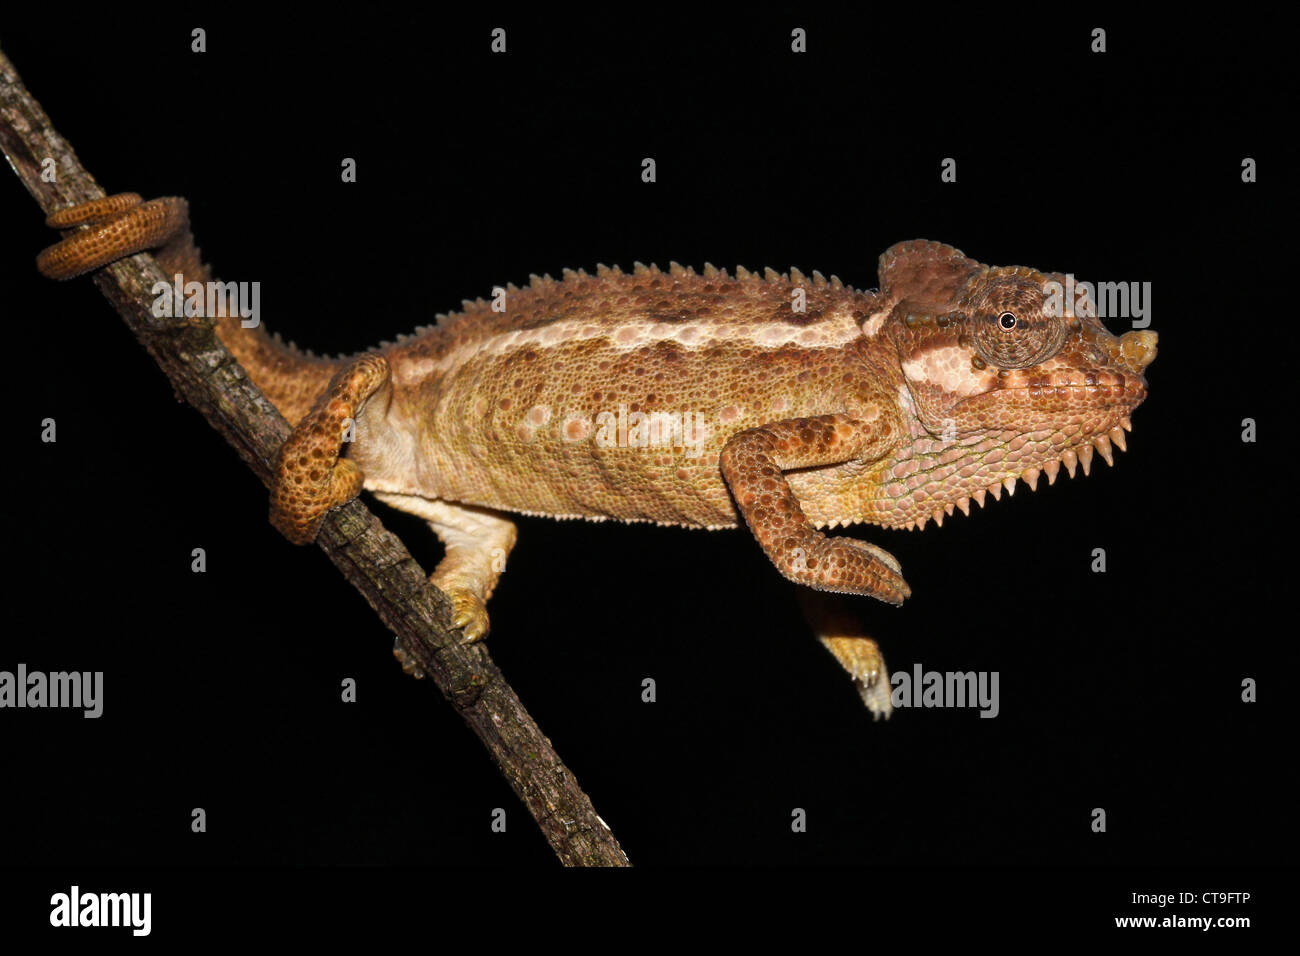 A beautifully vibrant WILD Helmeted Chameleon in Kenya, Africa. Isolated on black with plenty of space for text. Stock Photo